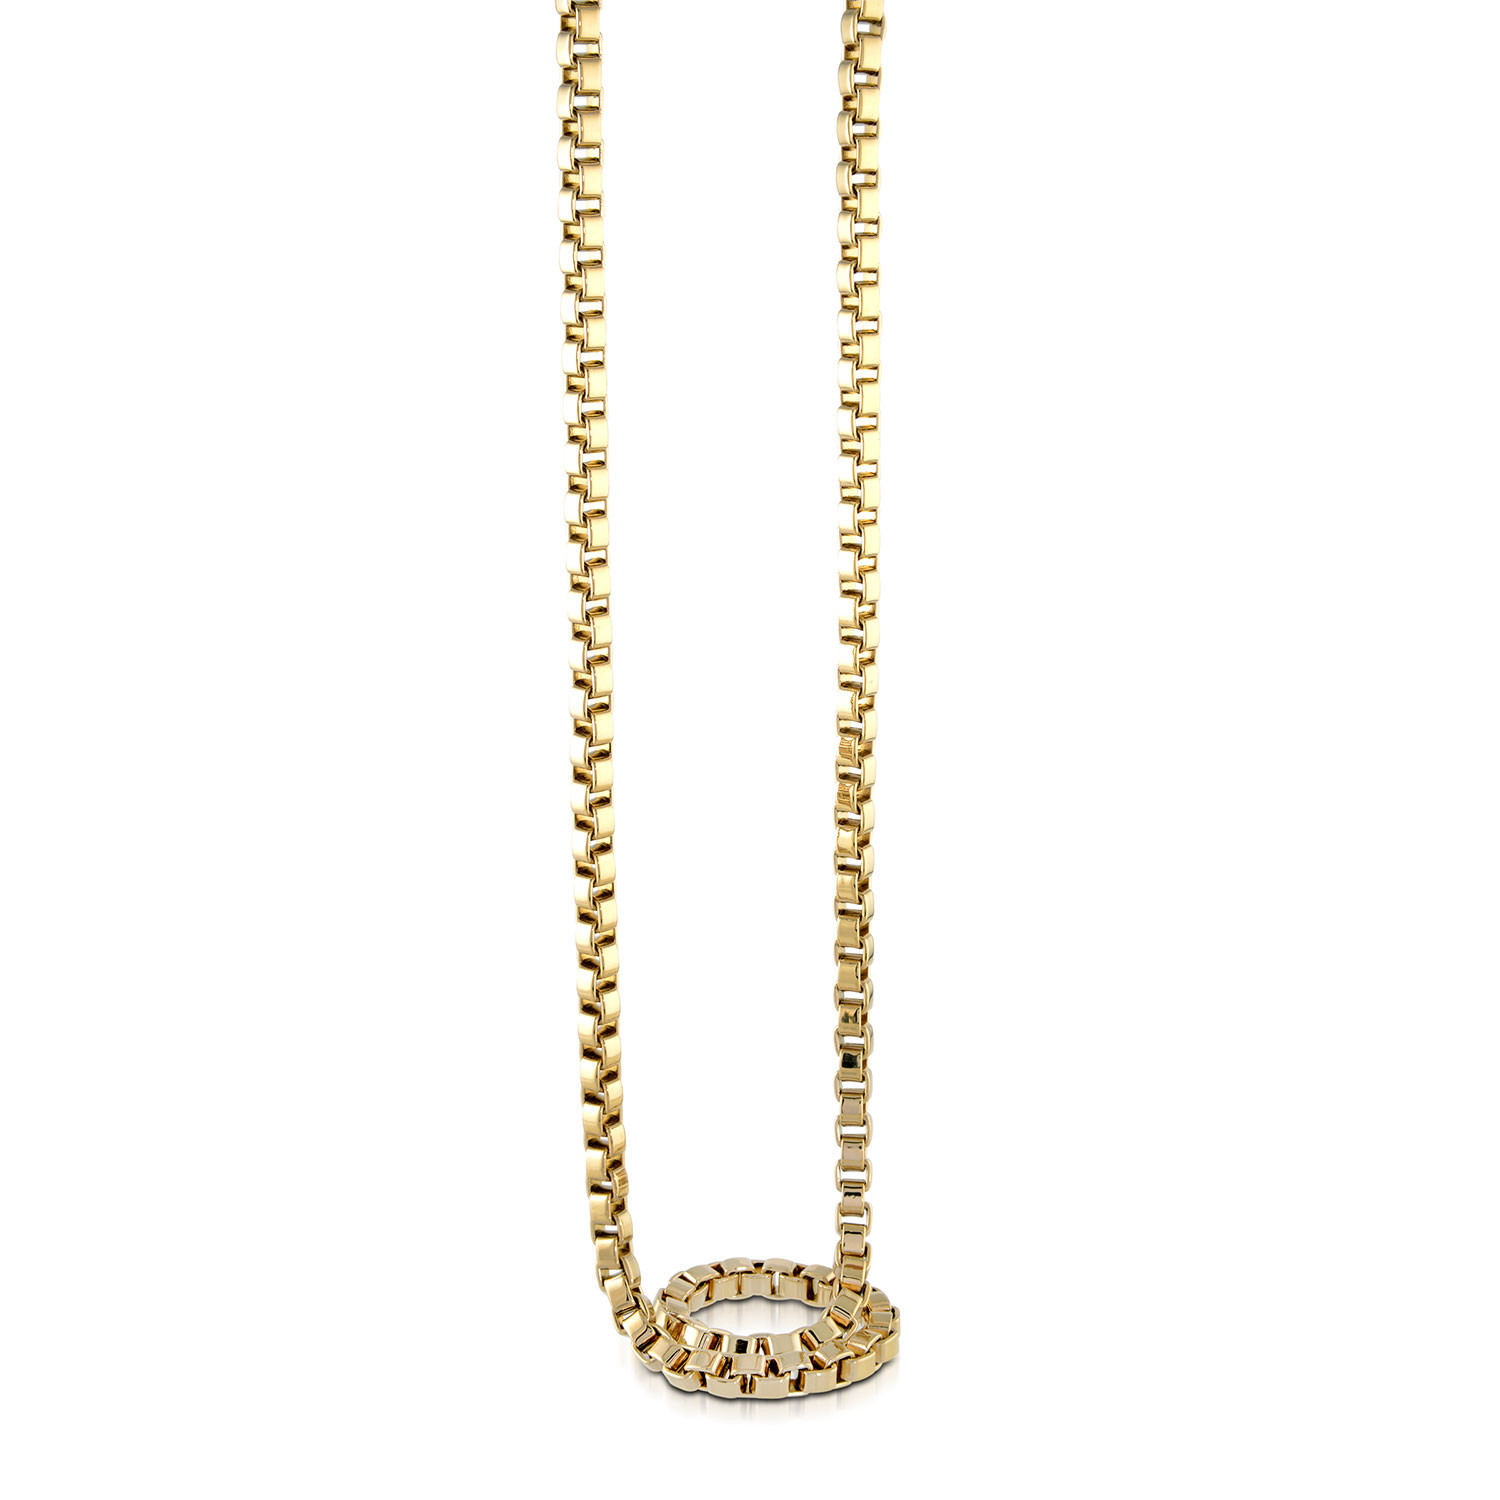 Square Box Link Chain // 5mm // Gold Plating - Italgem - Touch of Modern